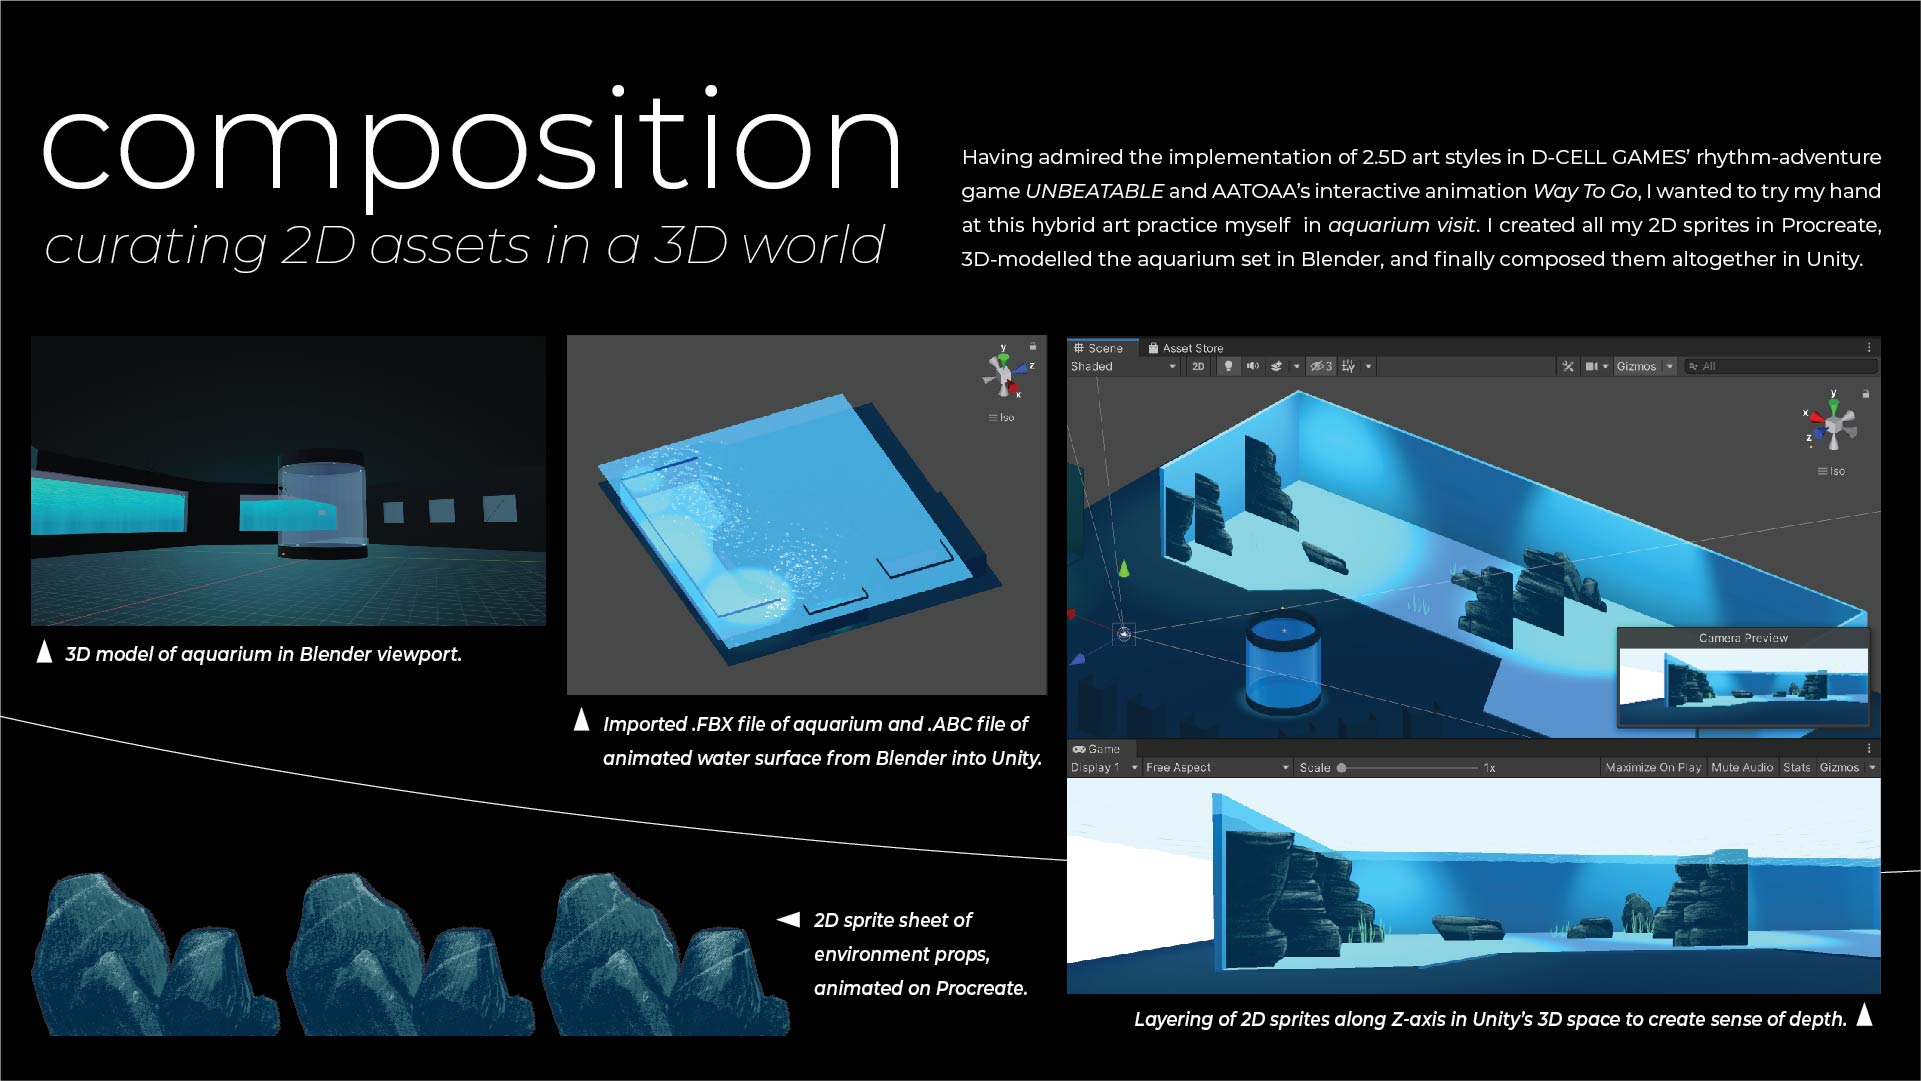 Composition - Curating 2D assets in a 3D world